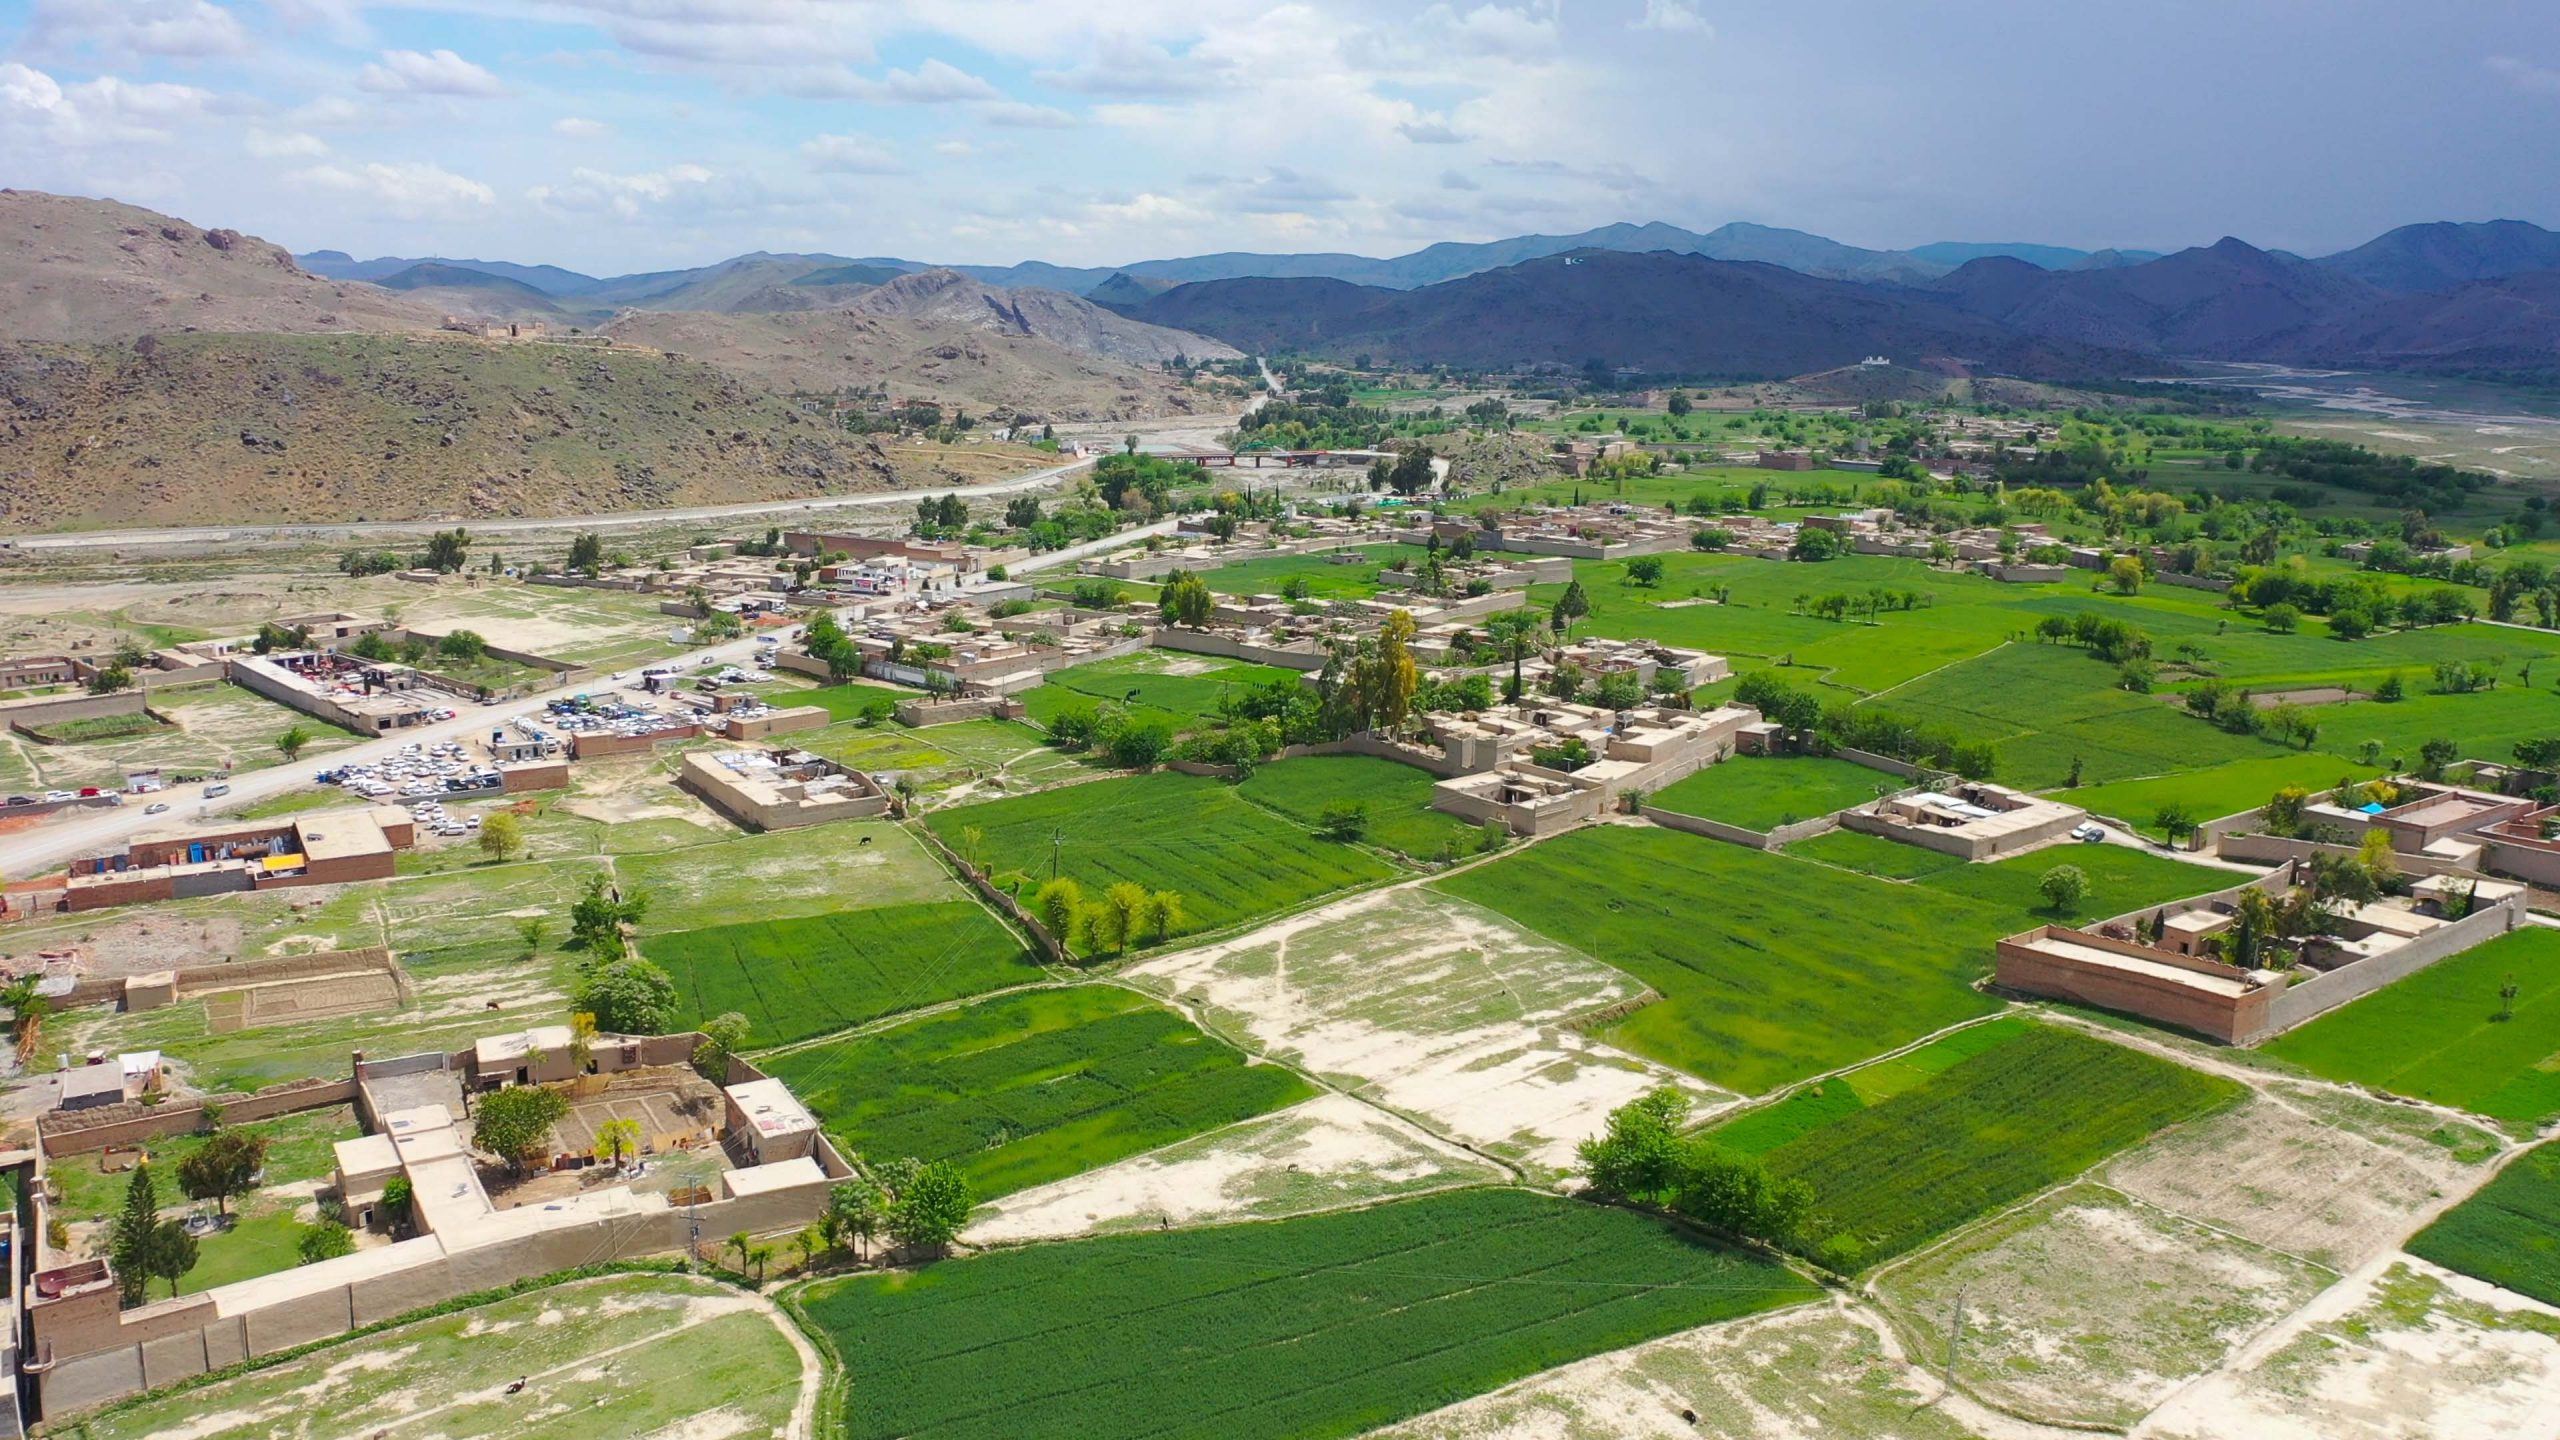 UNRAVELLING THE CONTEXTUAL REALITIES IN POST-CONFLICT NORTH WAZIRISTAN